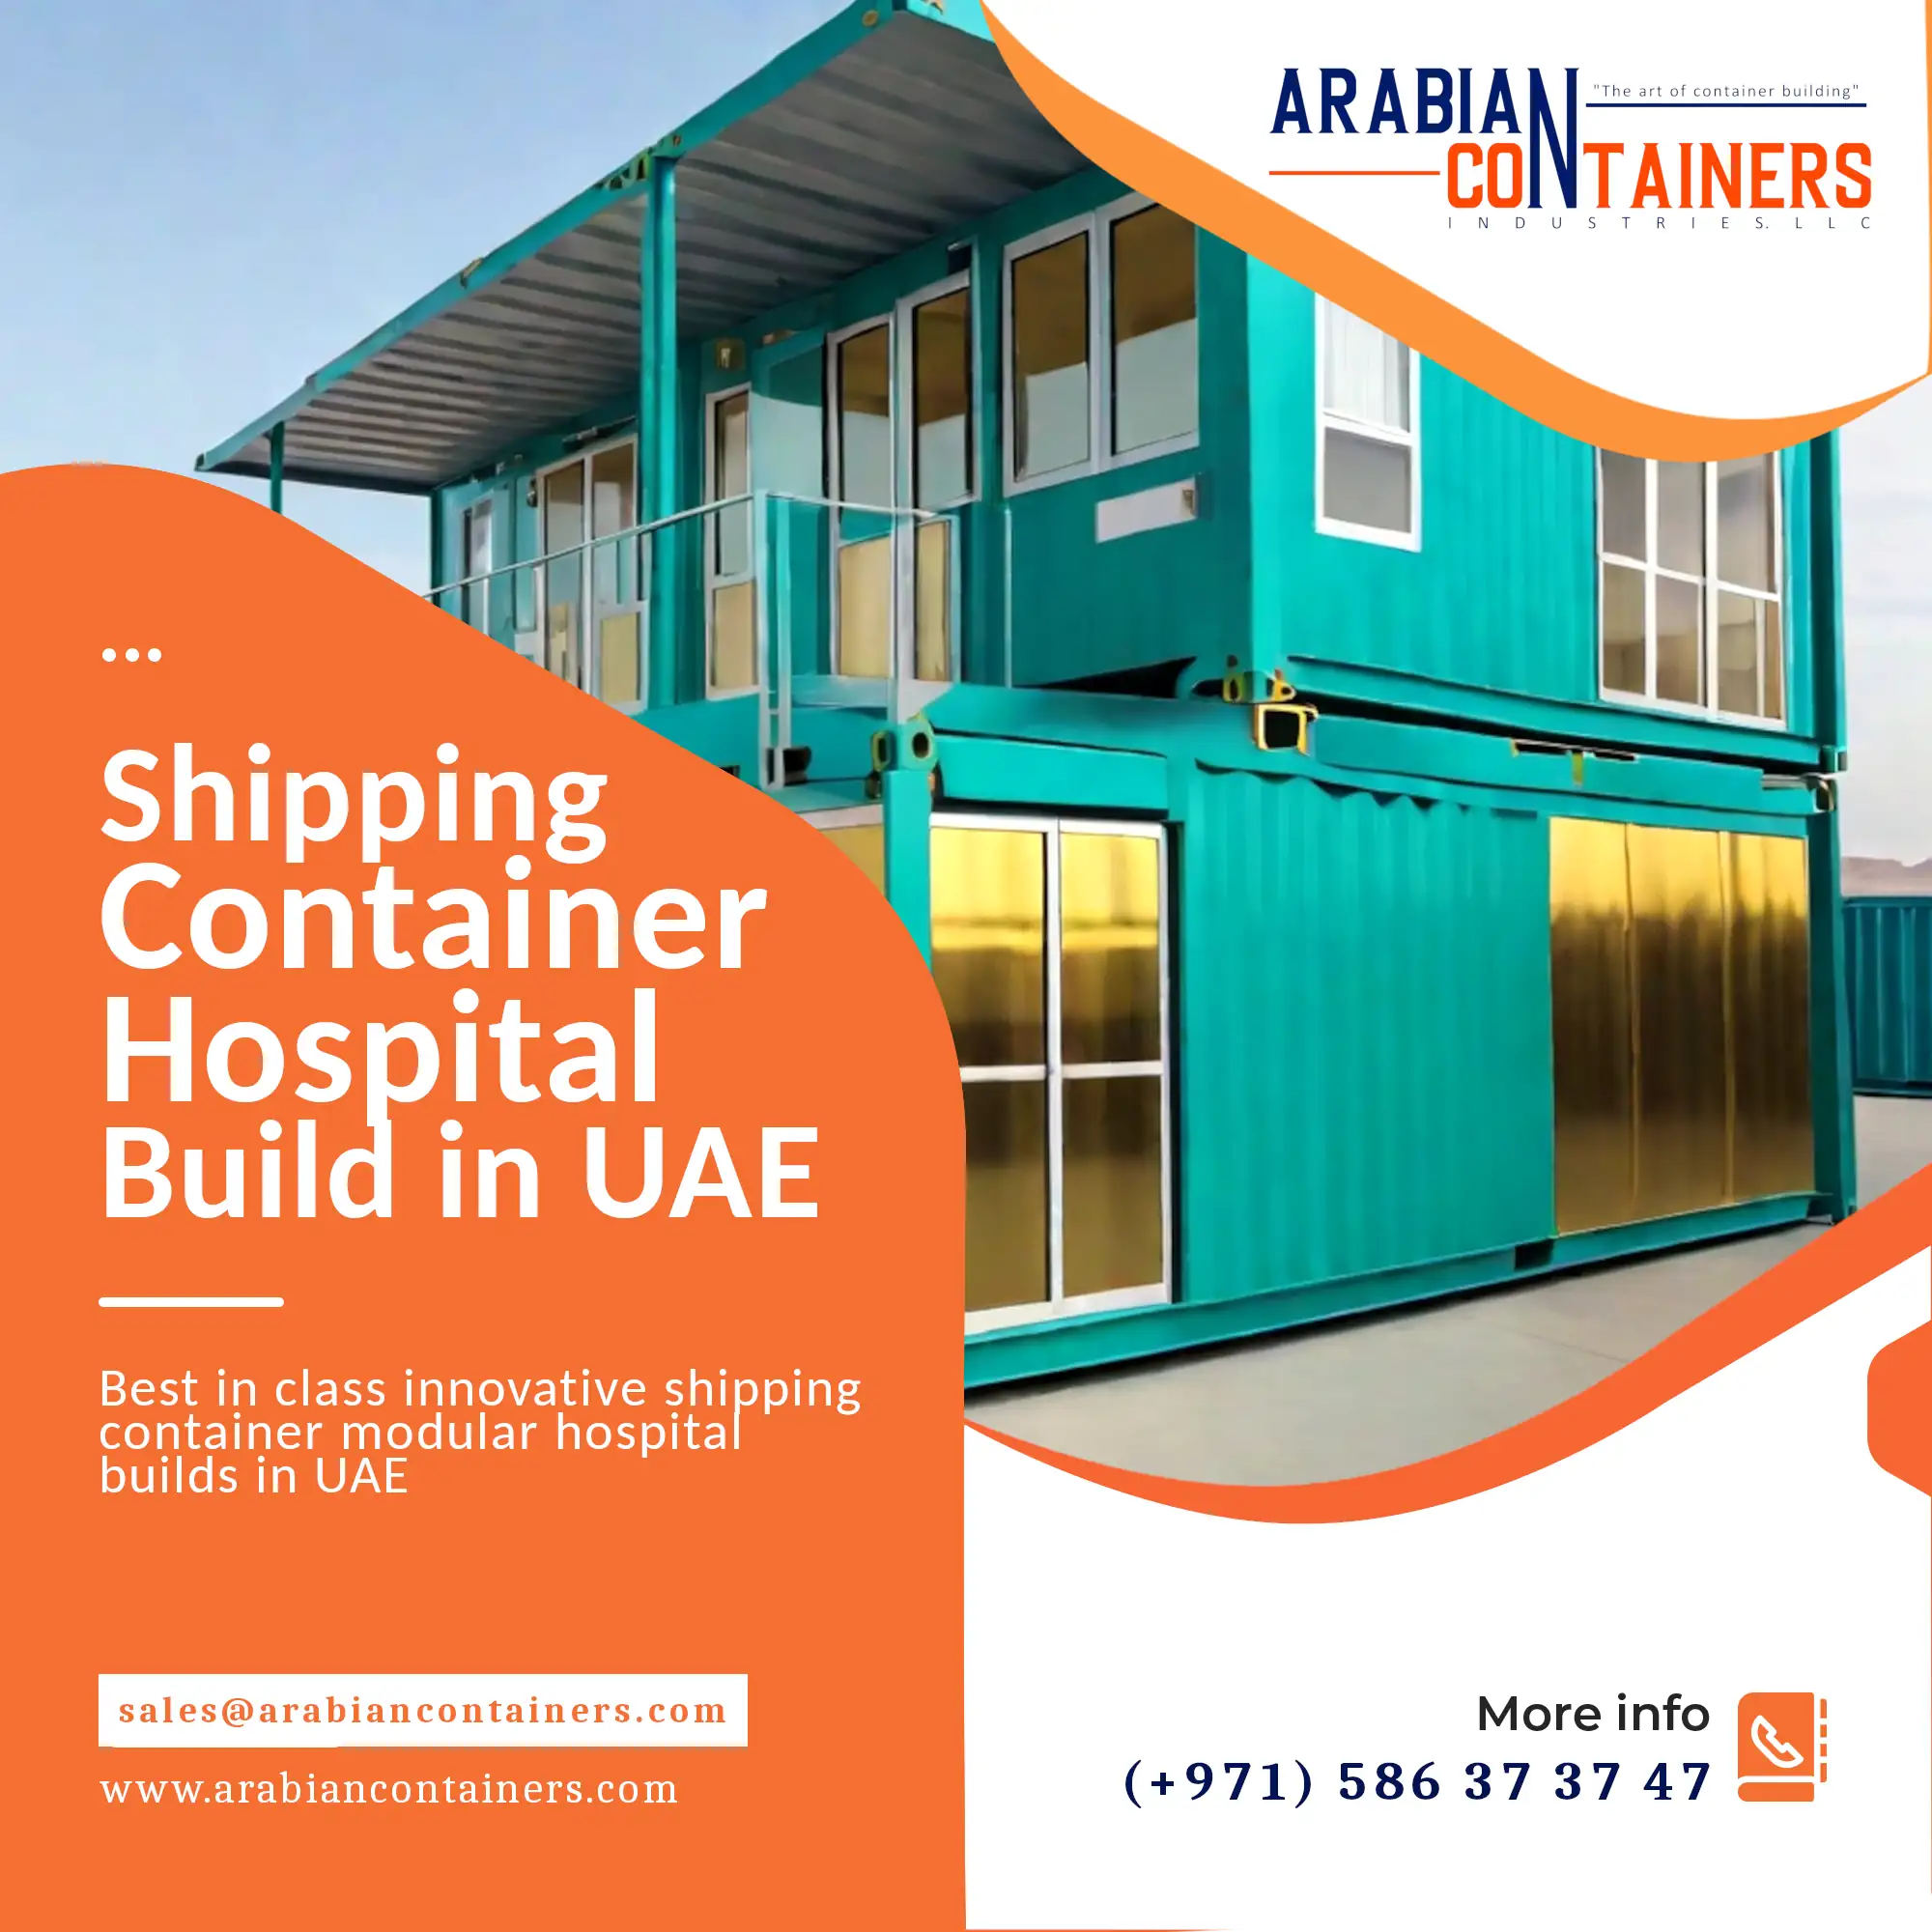 Shipping container hospital conversion company in UAE.